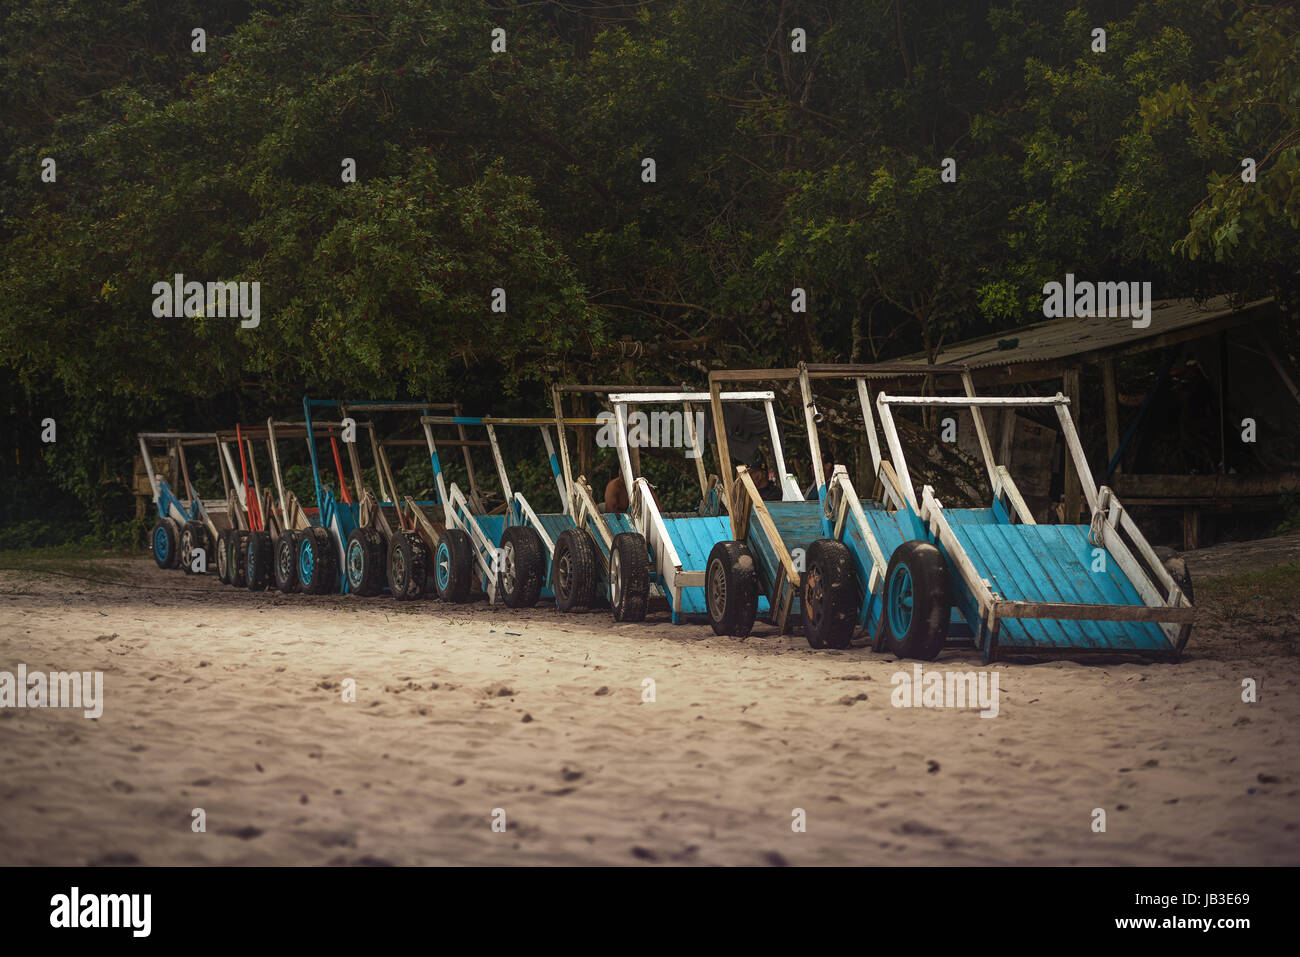 Ilha Do Mel, Paraná, Brazil - June 3, 2017: Wooden carts parked on the sand of the beach. Stock Photo